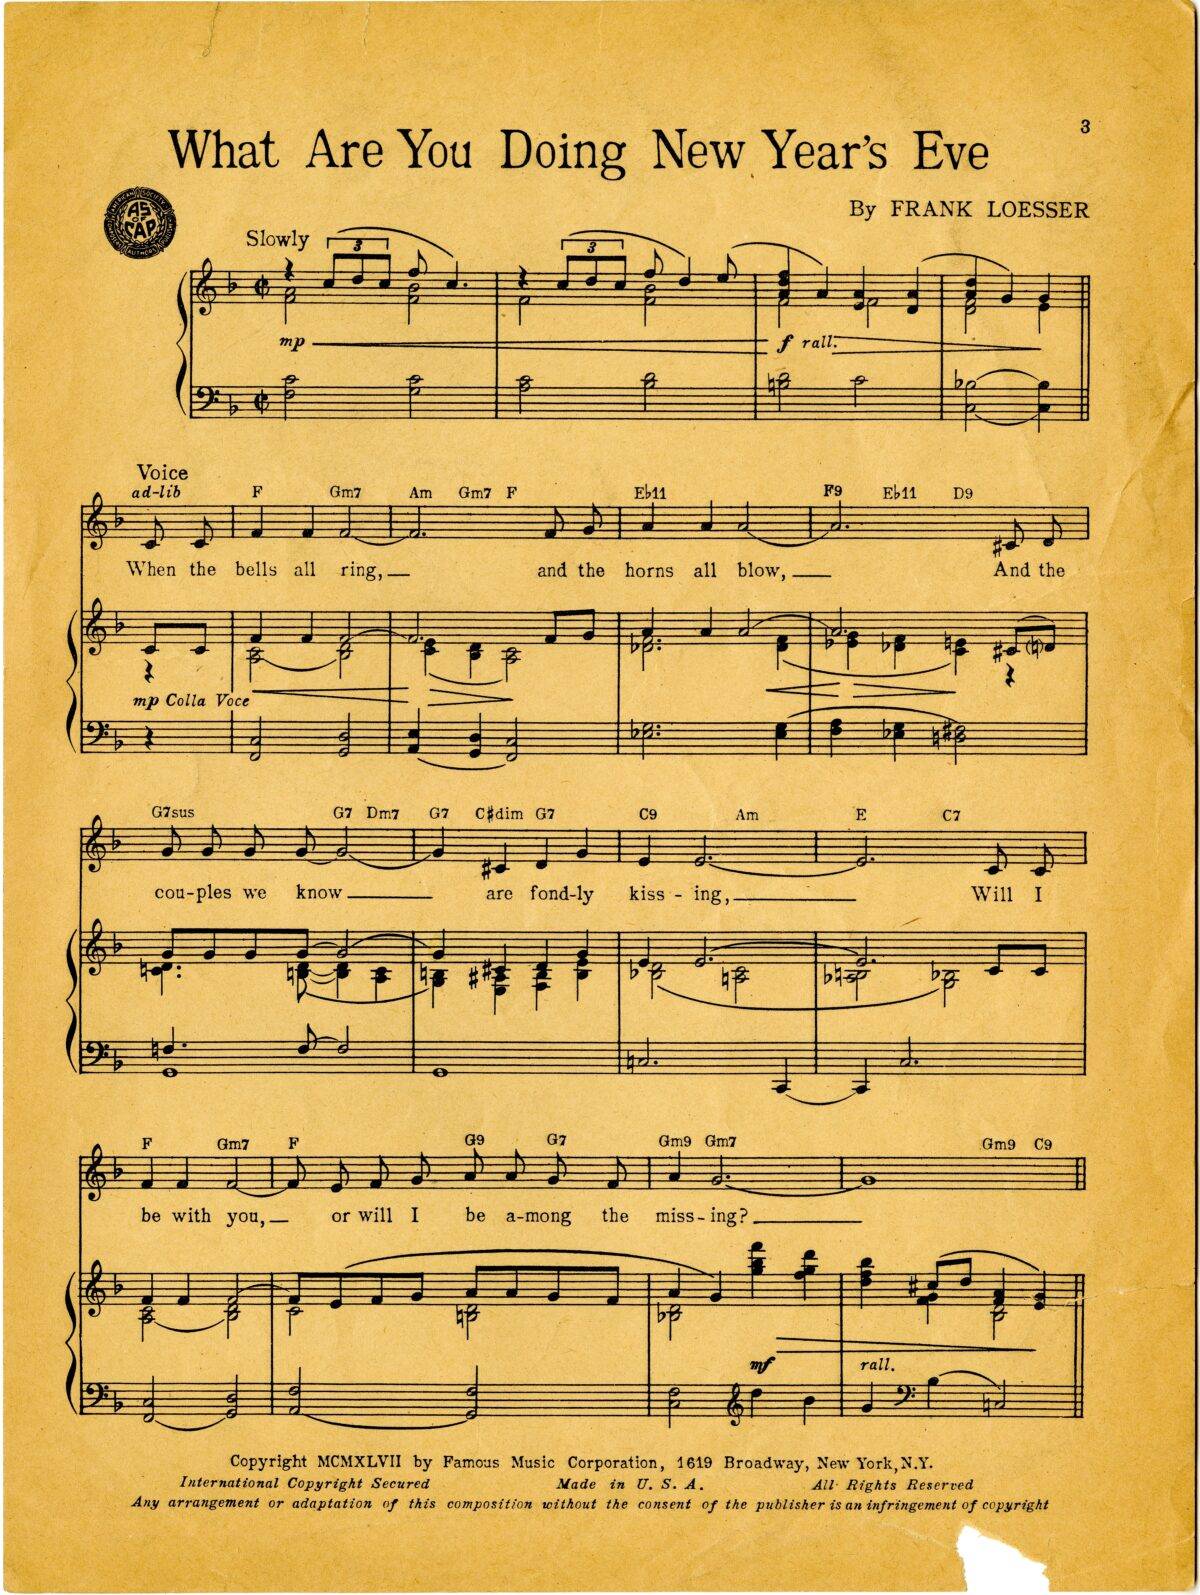 Sheet music for "What are You Doing New Years's Eve"